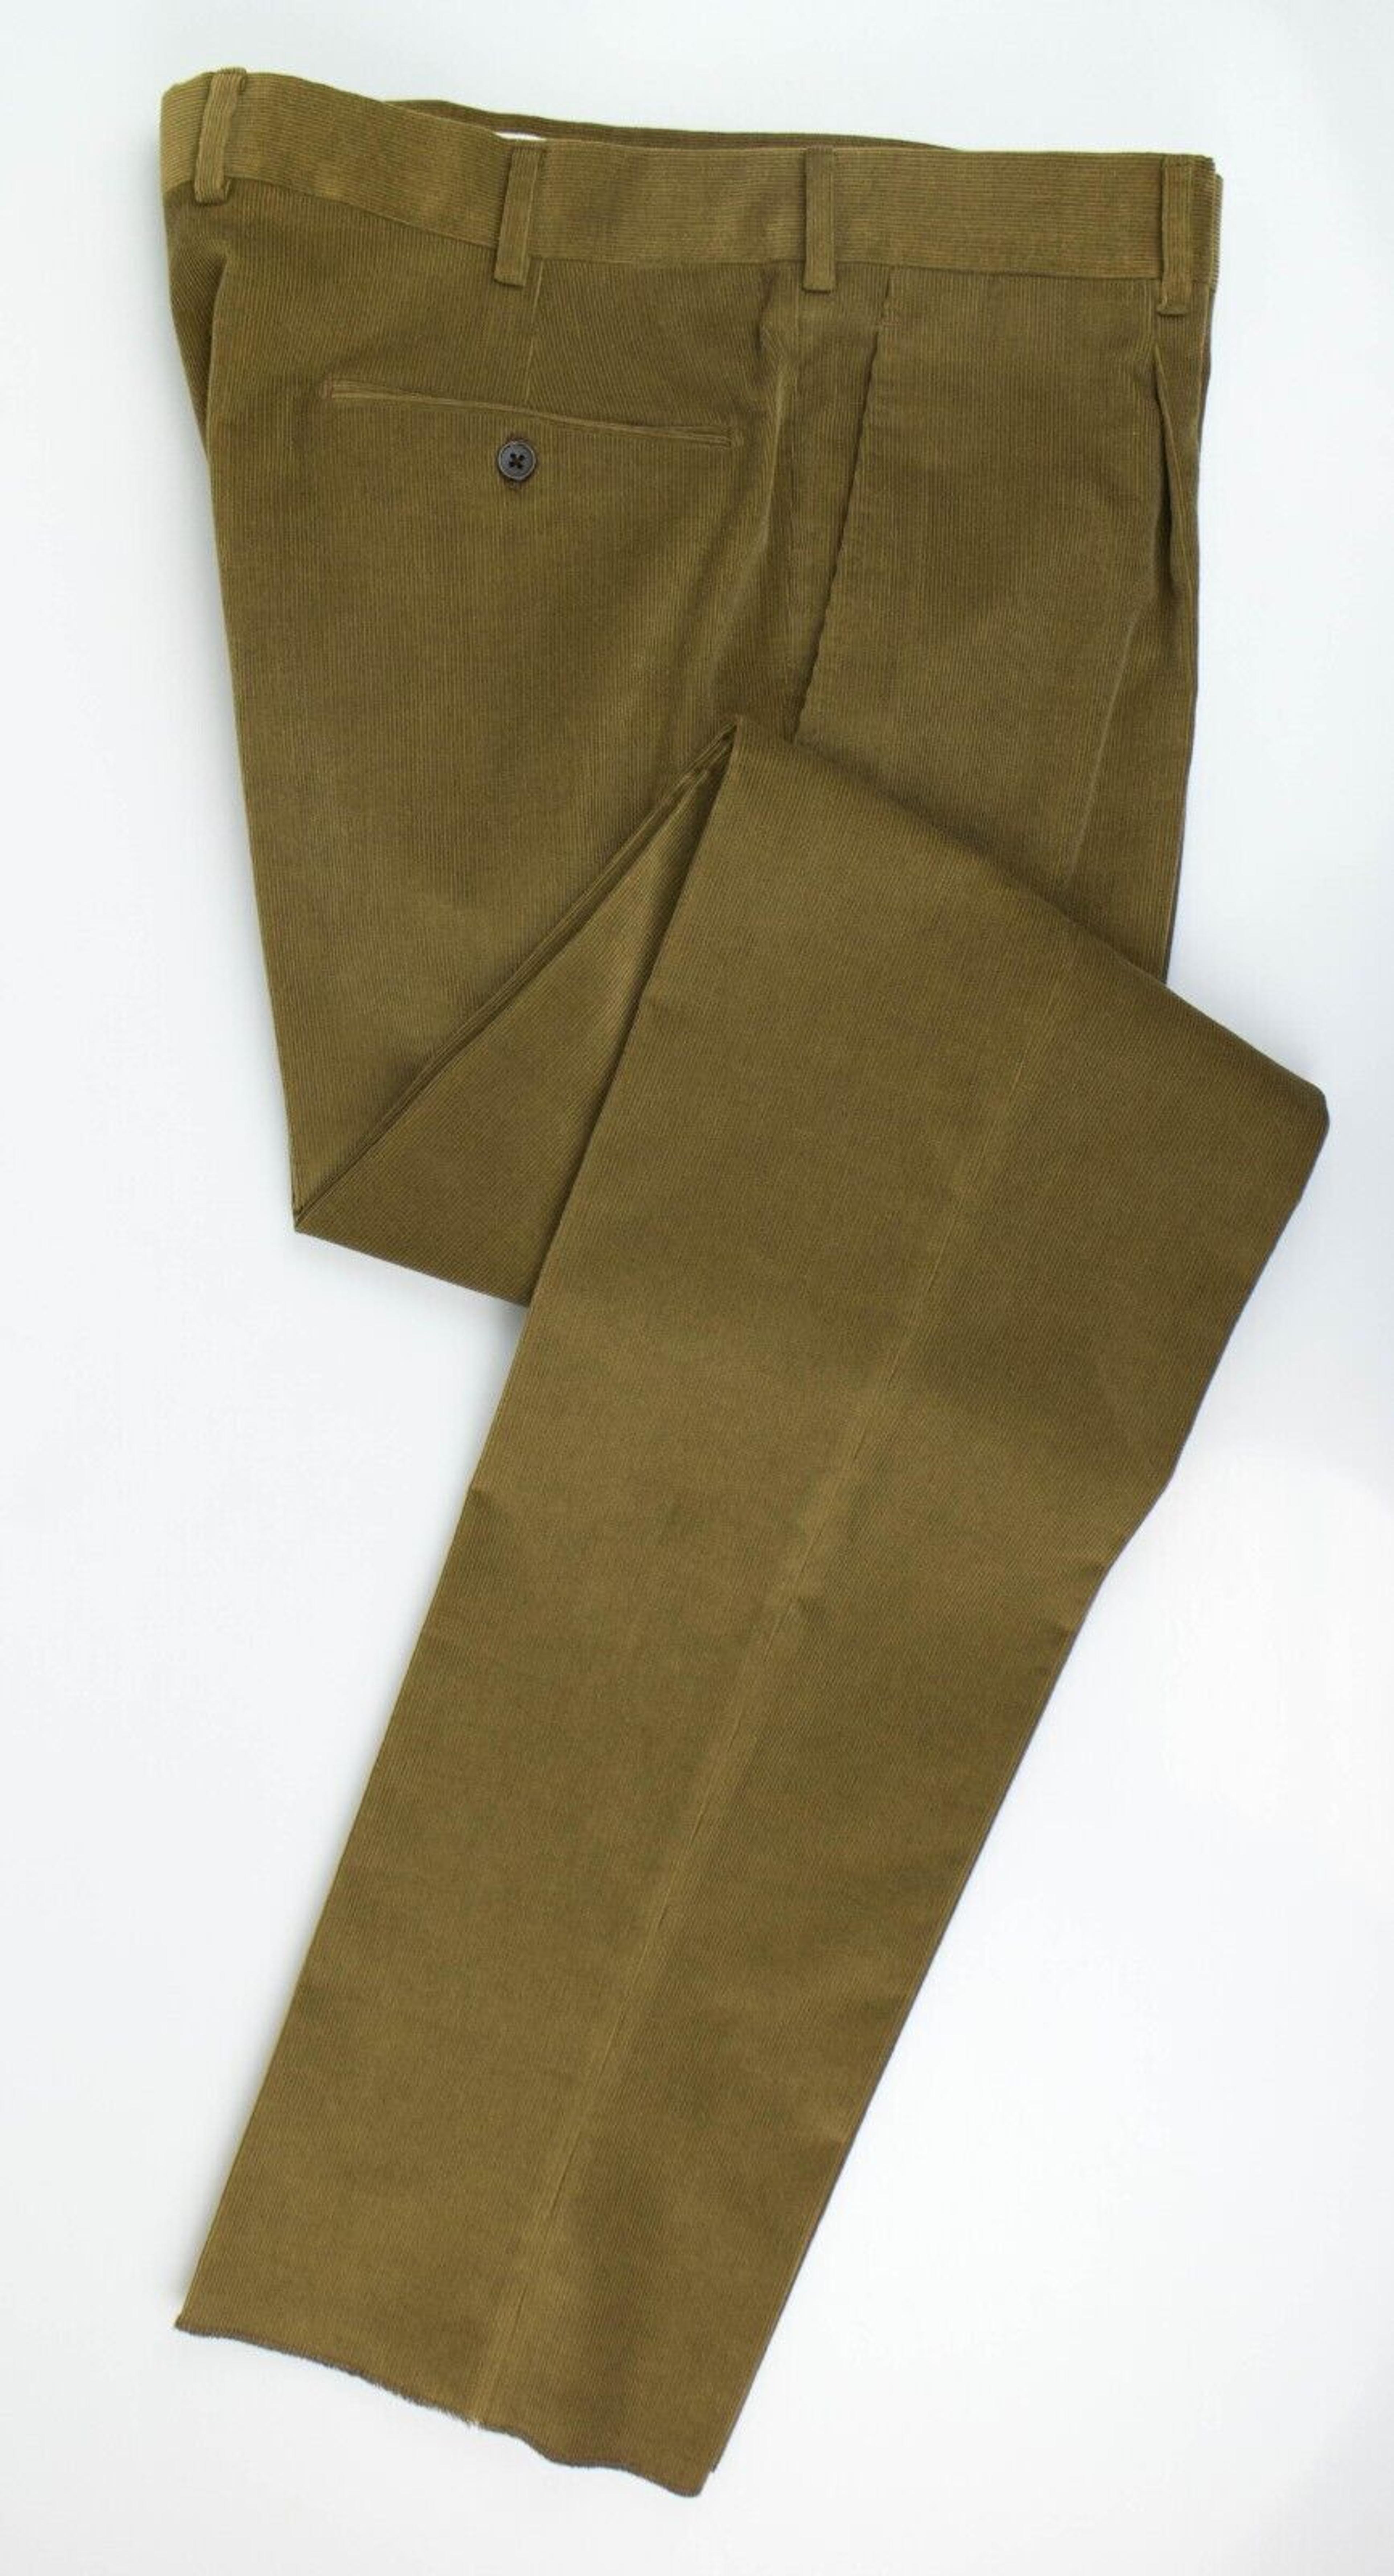 Alternate View 5 of Brown Cotton Blend Corduroy Casual Pants